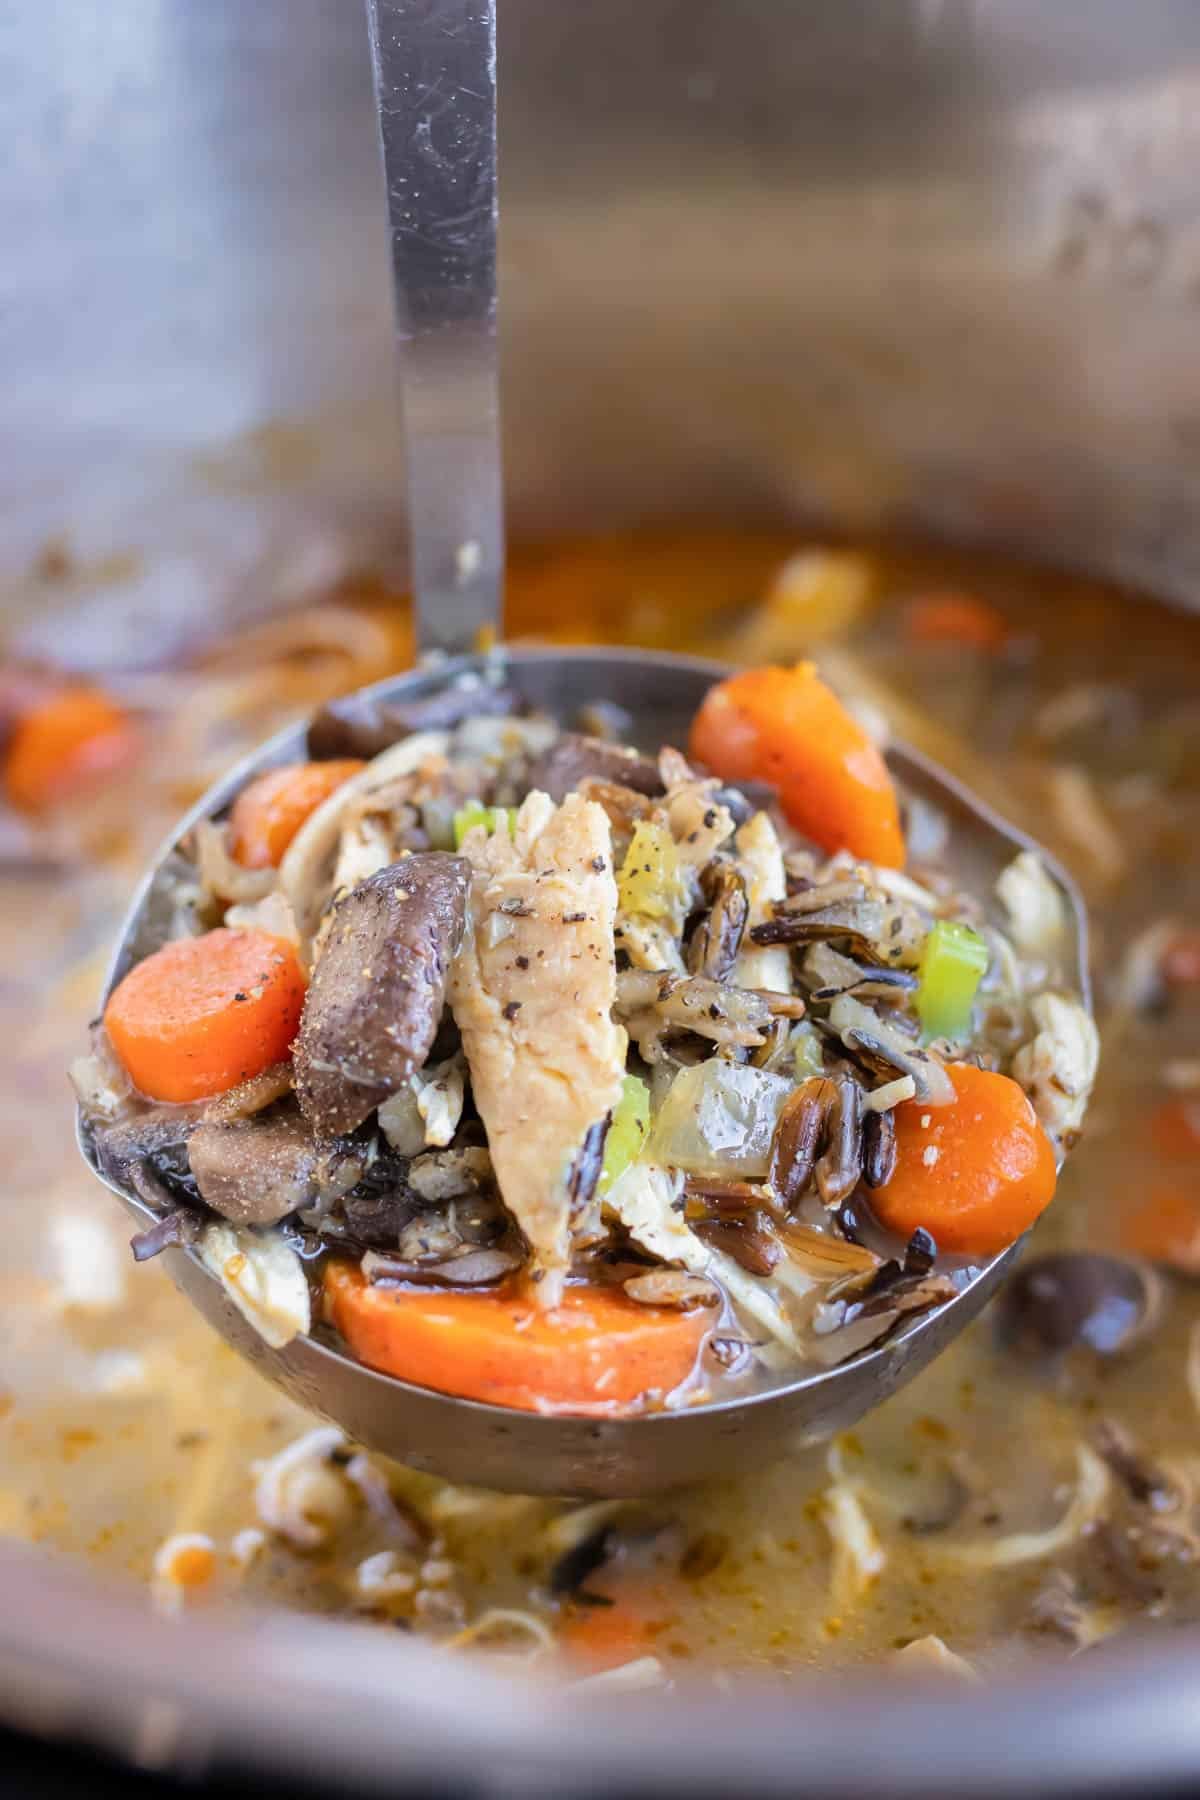 A ladle is full of chicken, mushrooms, vegetables, rice, and broth before serving.